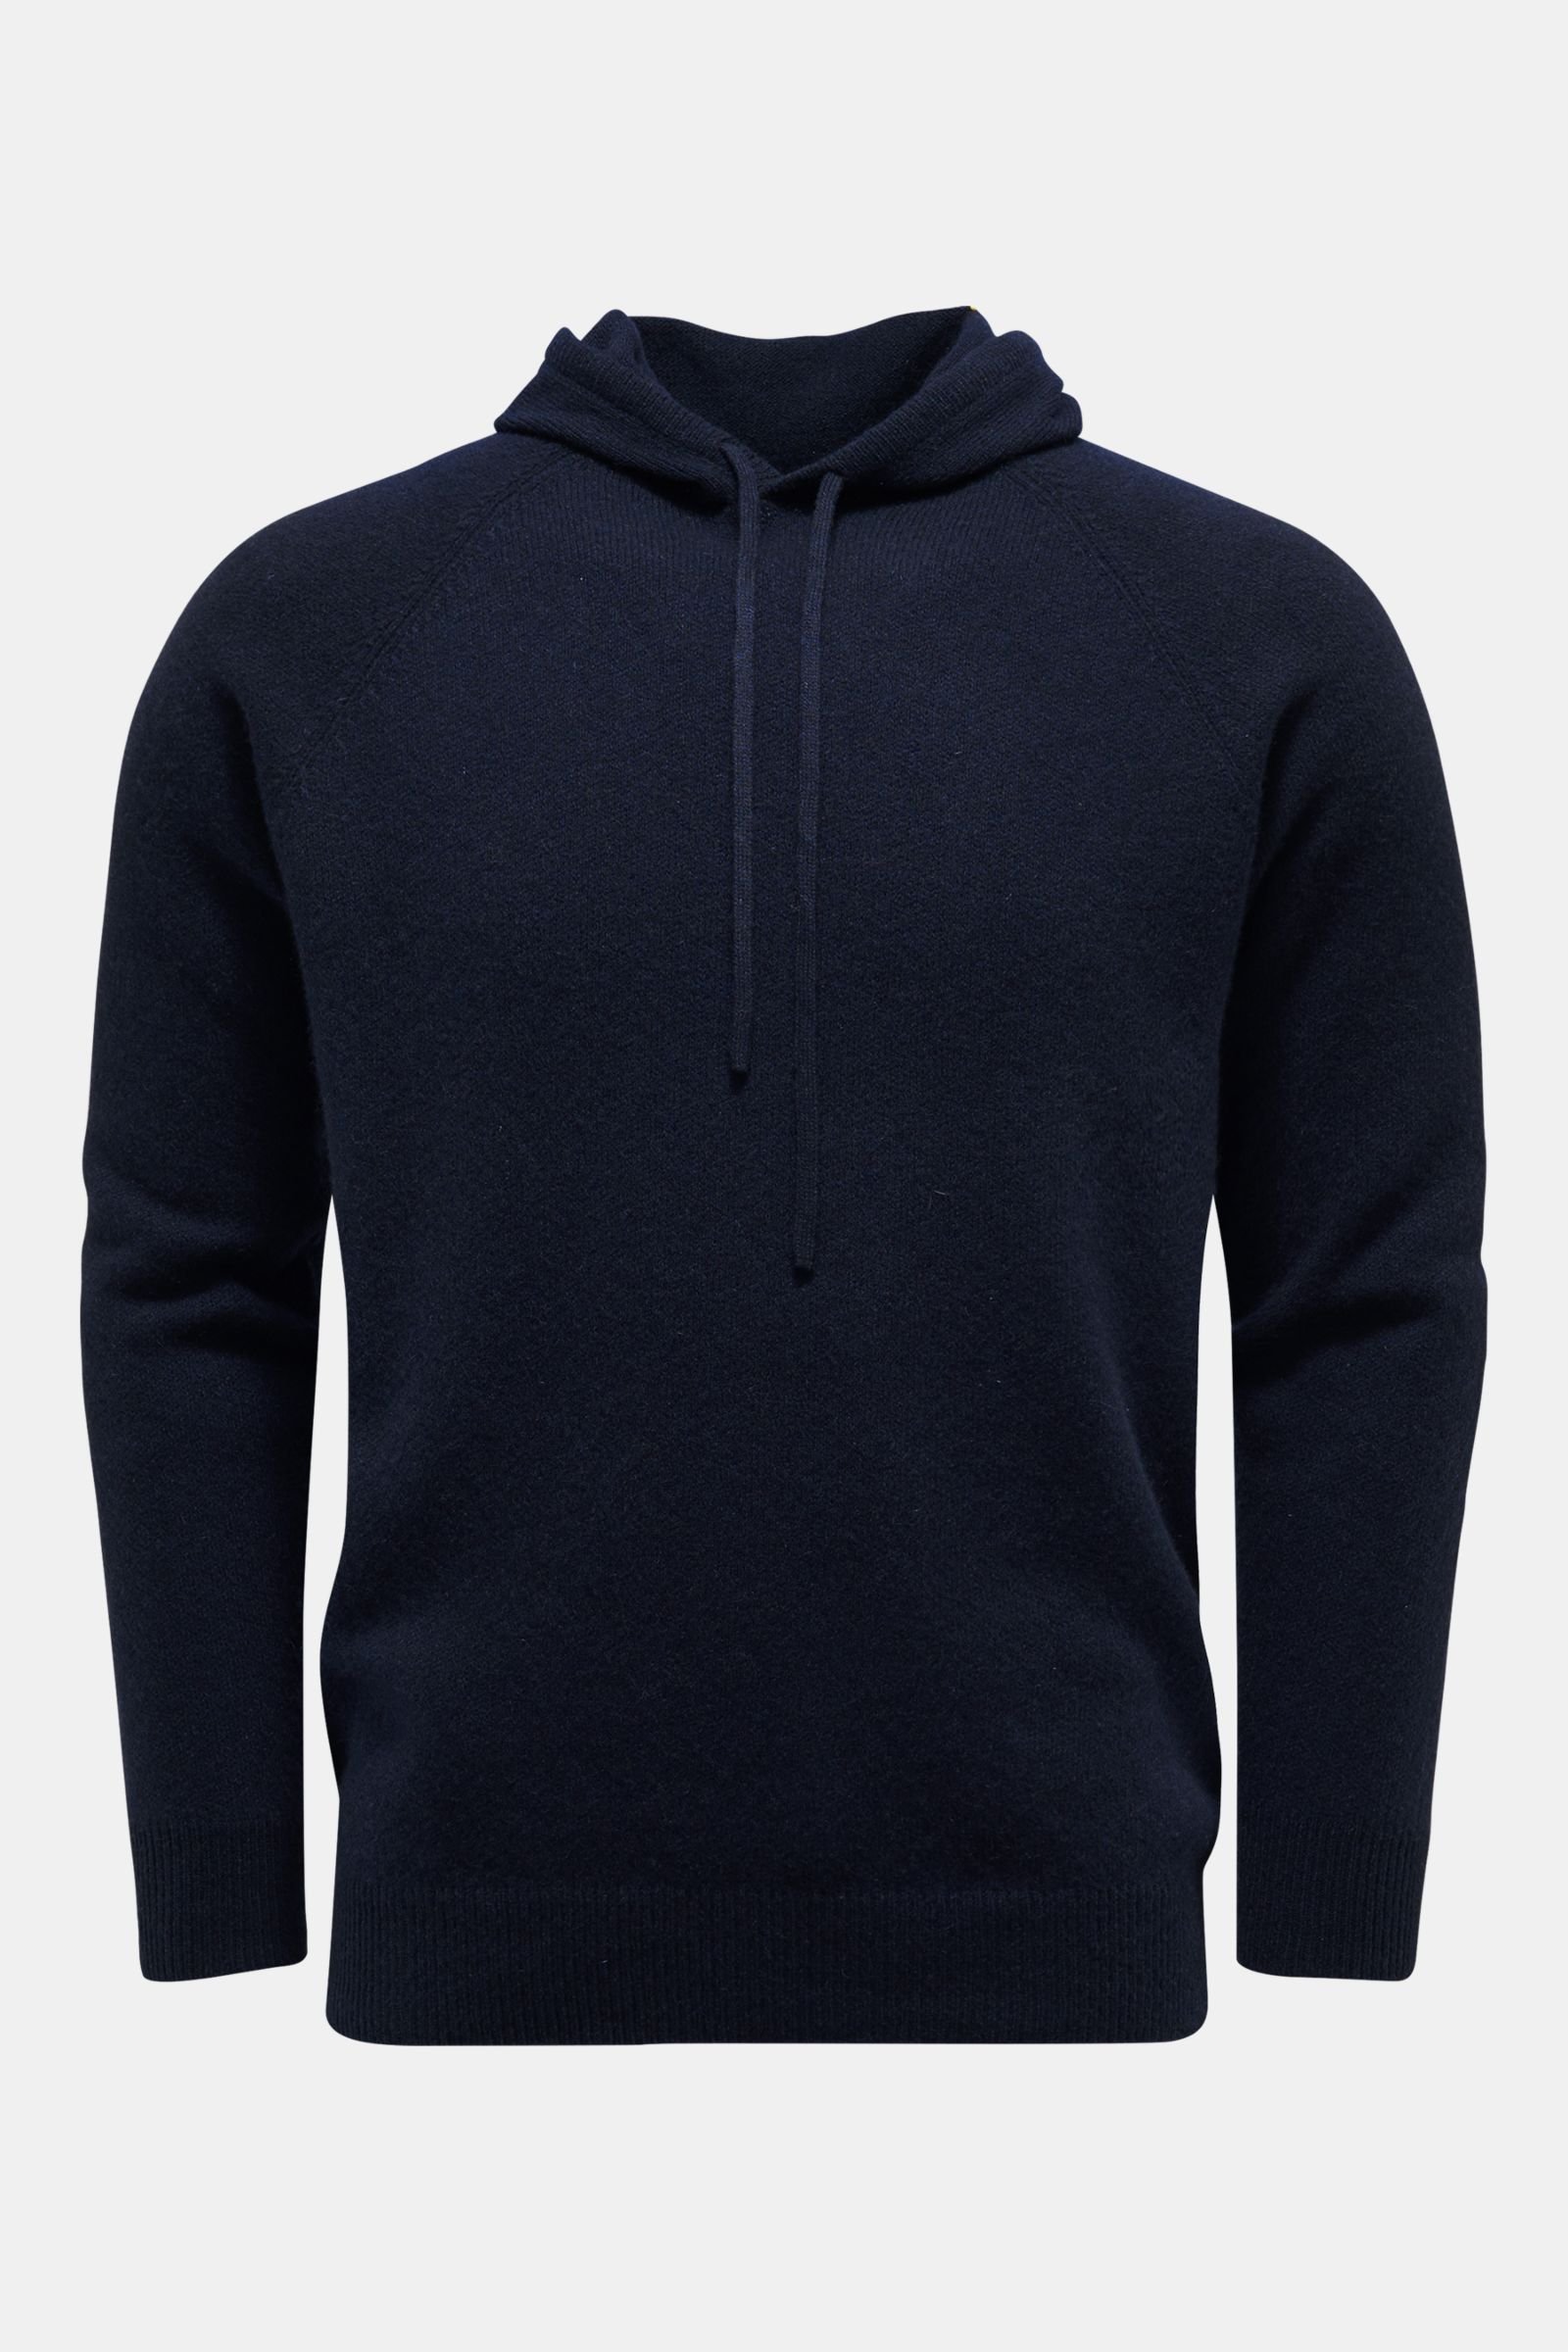 Cashmere hooded jumper 'The Hoodie' navy